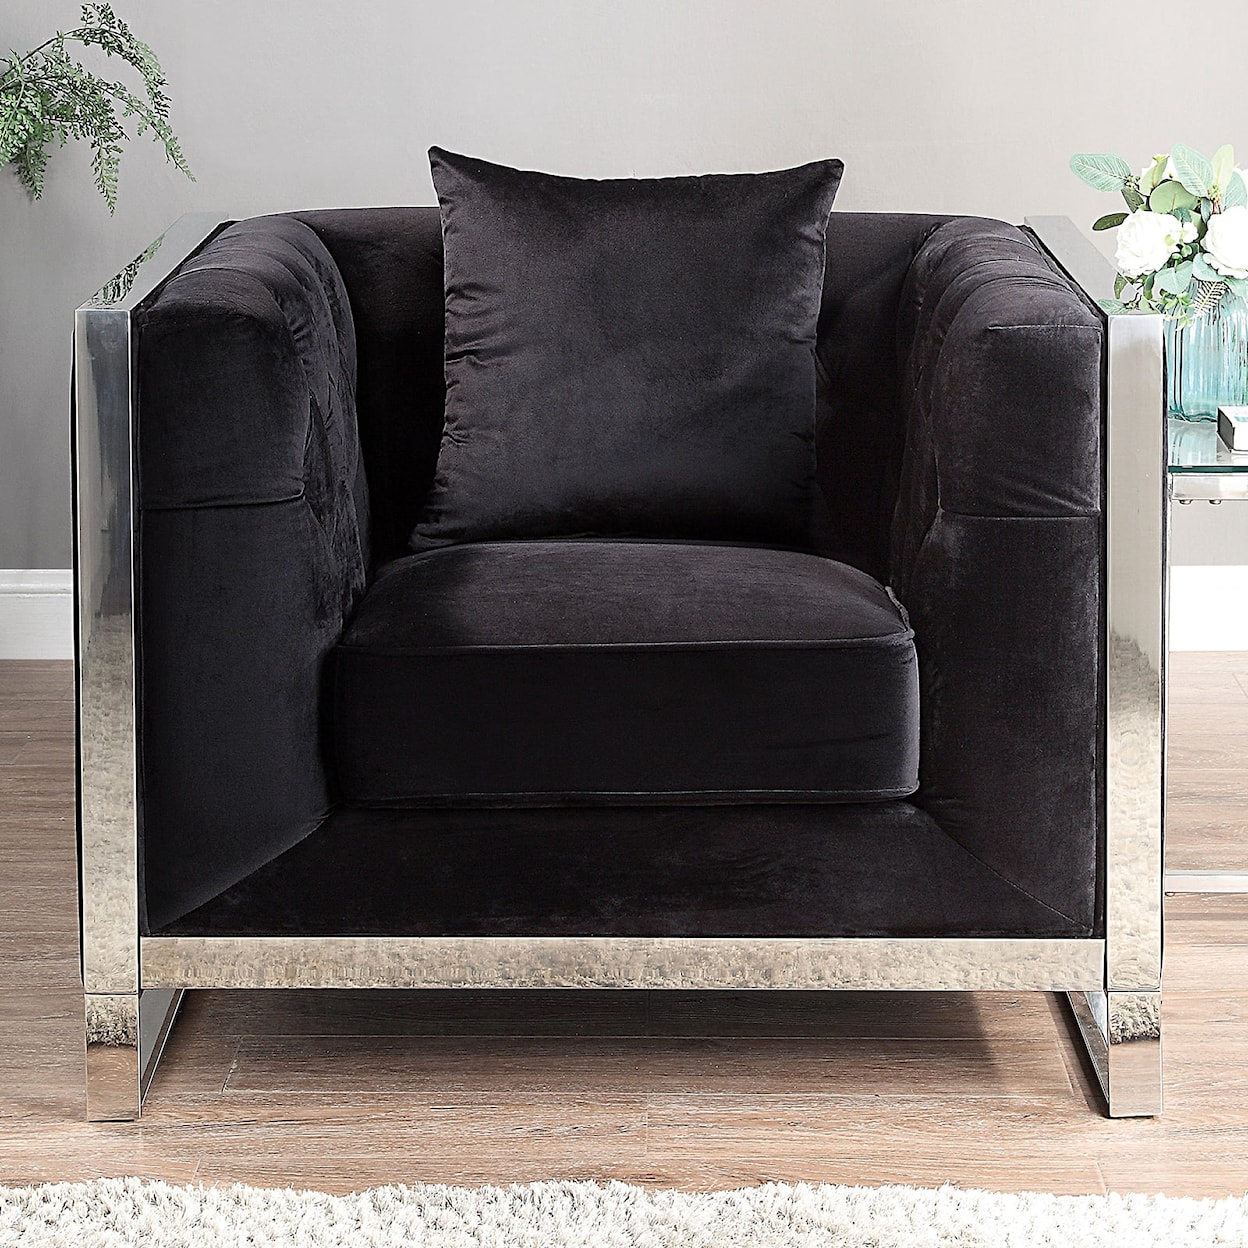 Furniture of America EVADNE Accent Chair with Pillow - Black